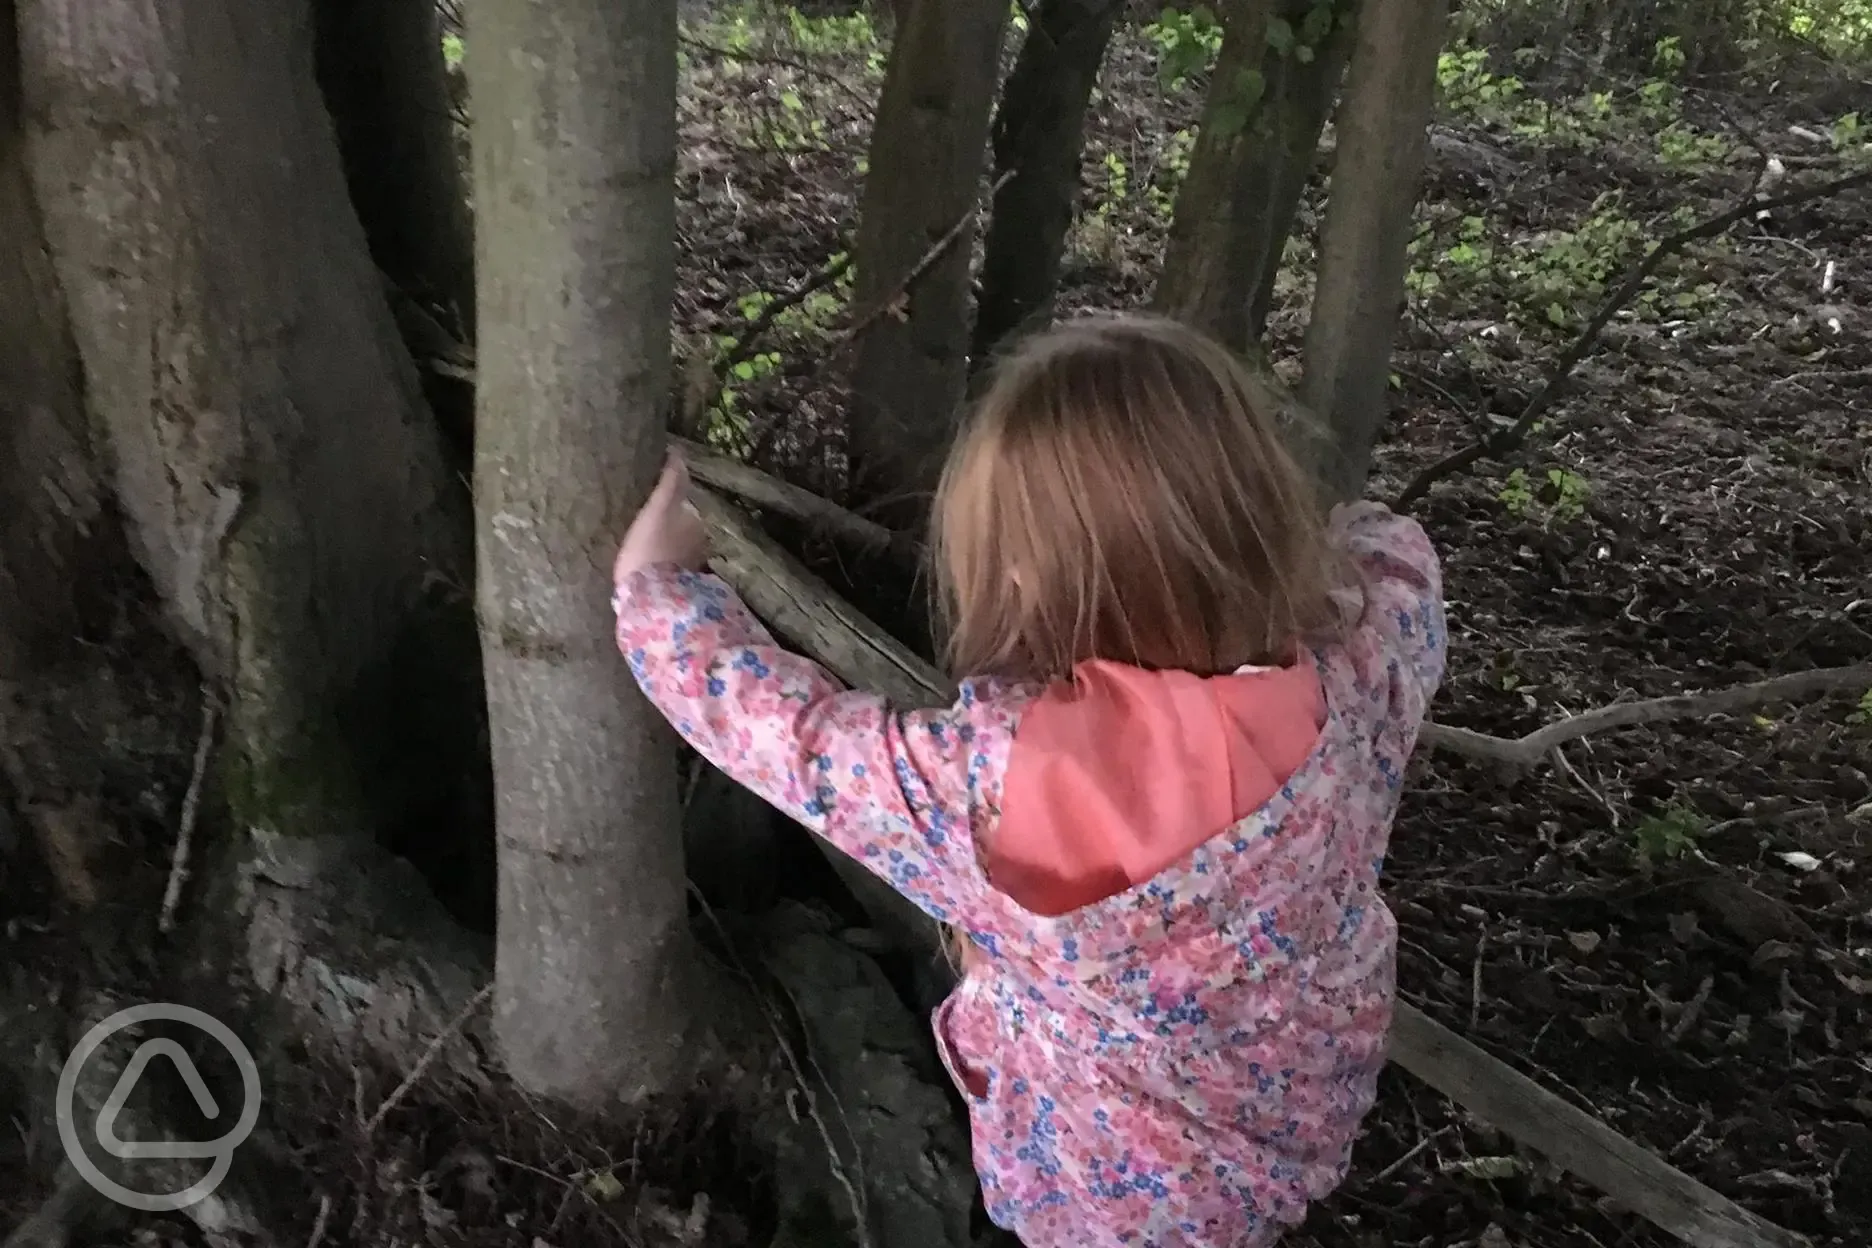 Making dens in the Glamping wood